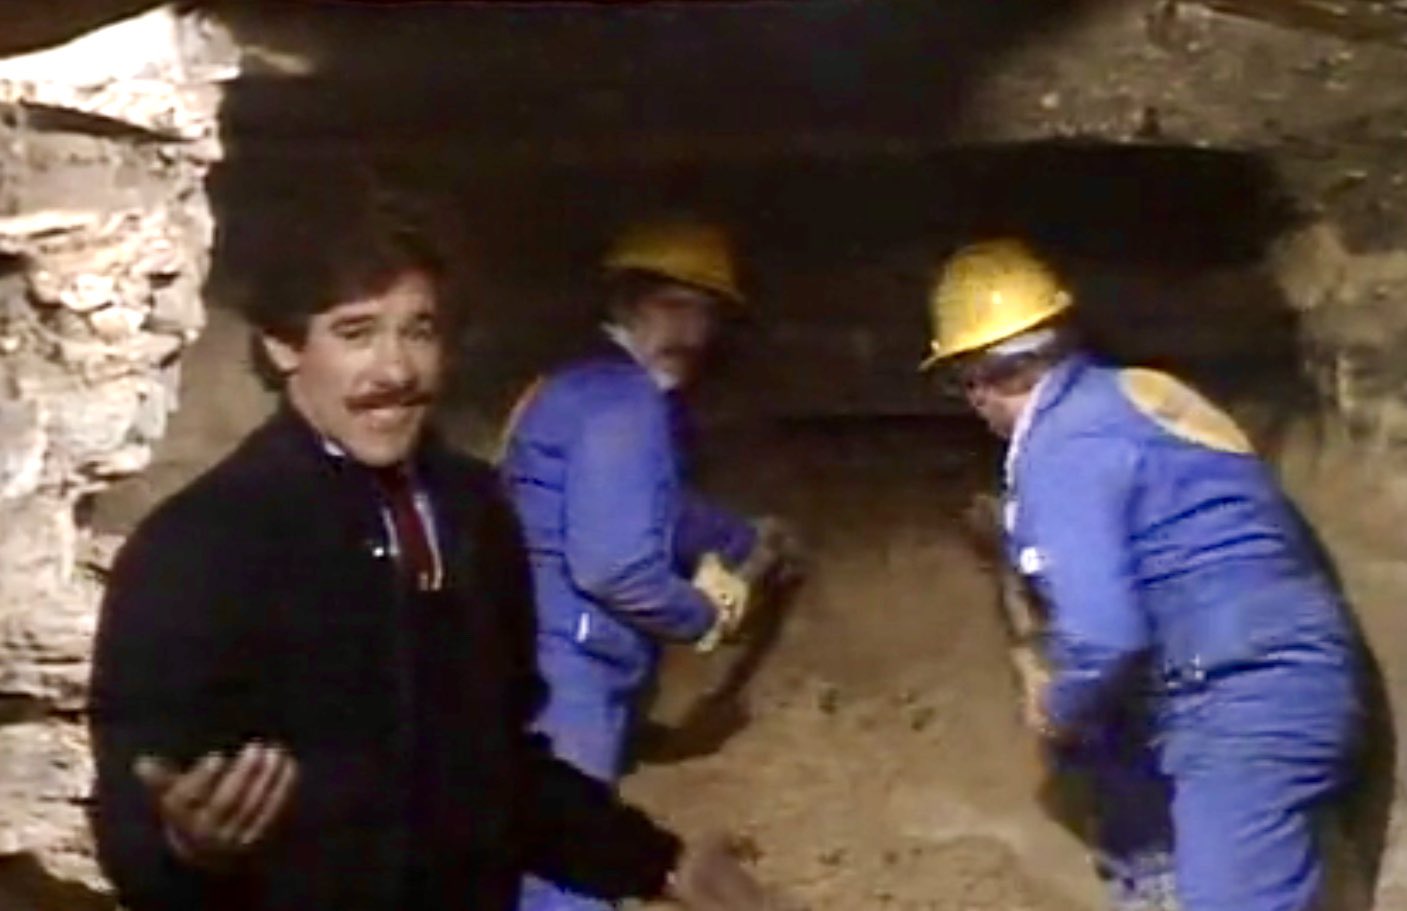 RetroNewsNow on Twitter: "📺The live two-hour 'Mystery of Al Capone's Vaults'  hosted by Geraldo Rivera aired 35 years ago, April 21, 1986. After much  hype, Geraldo found only dirt and several empty